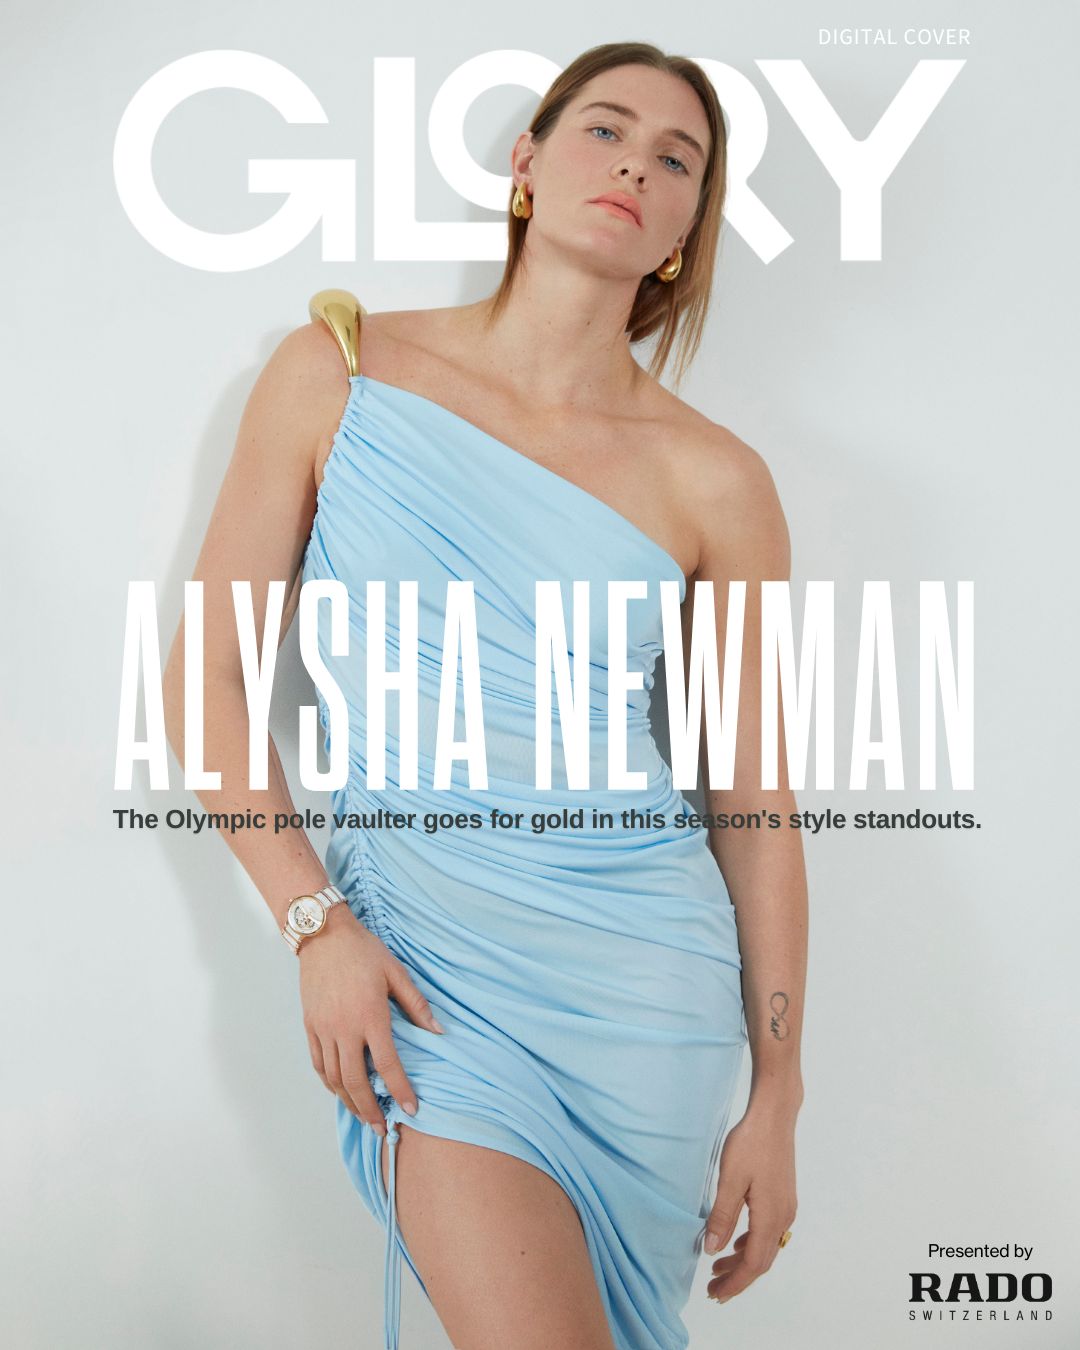 GLORY magazine cover featuring Alysha Newman wearing a blue one-shoulder dress with gold hardware and a white Rado watch.